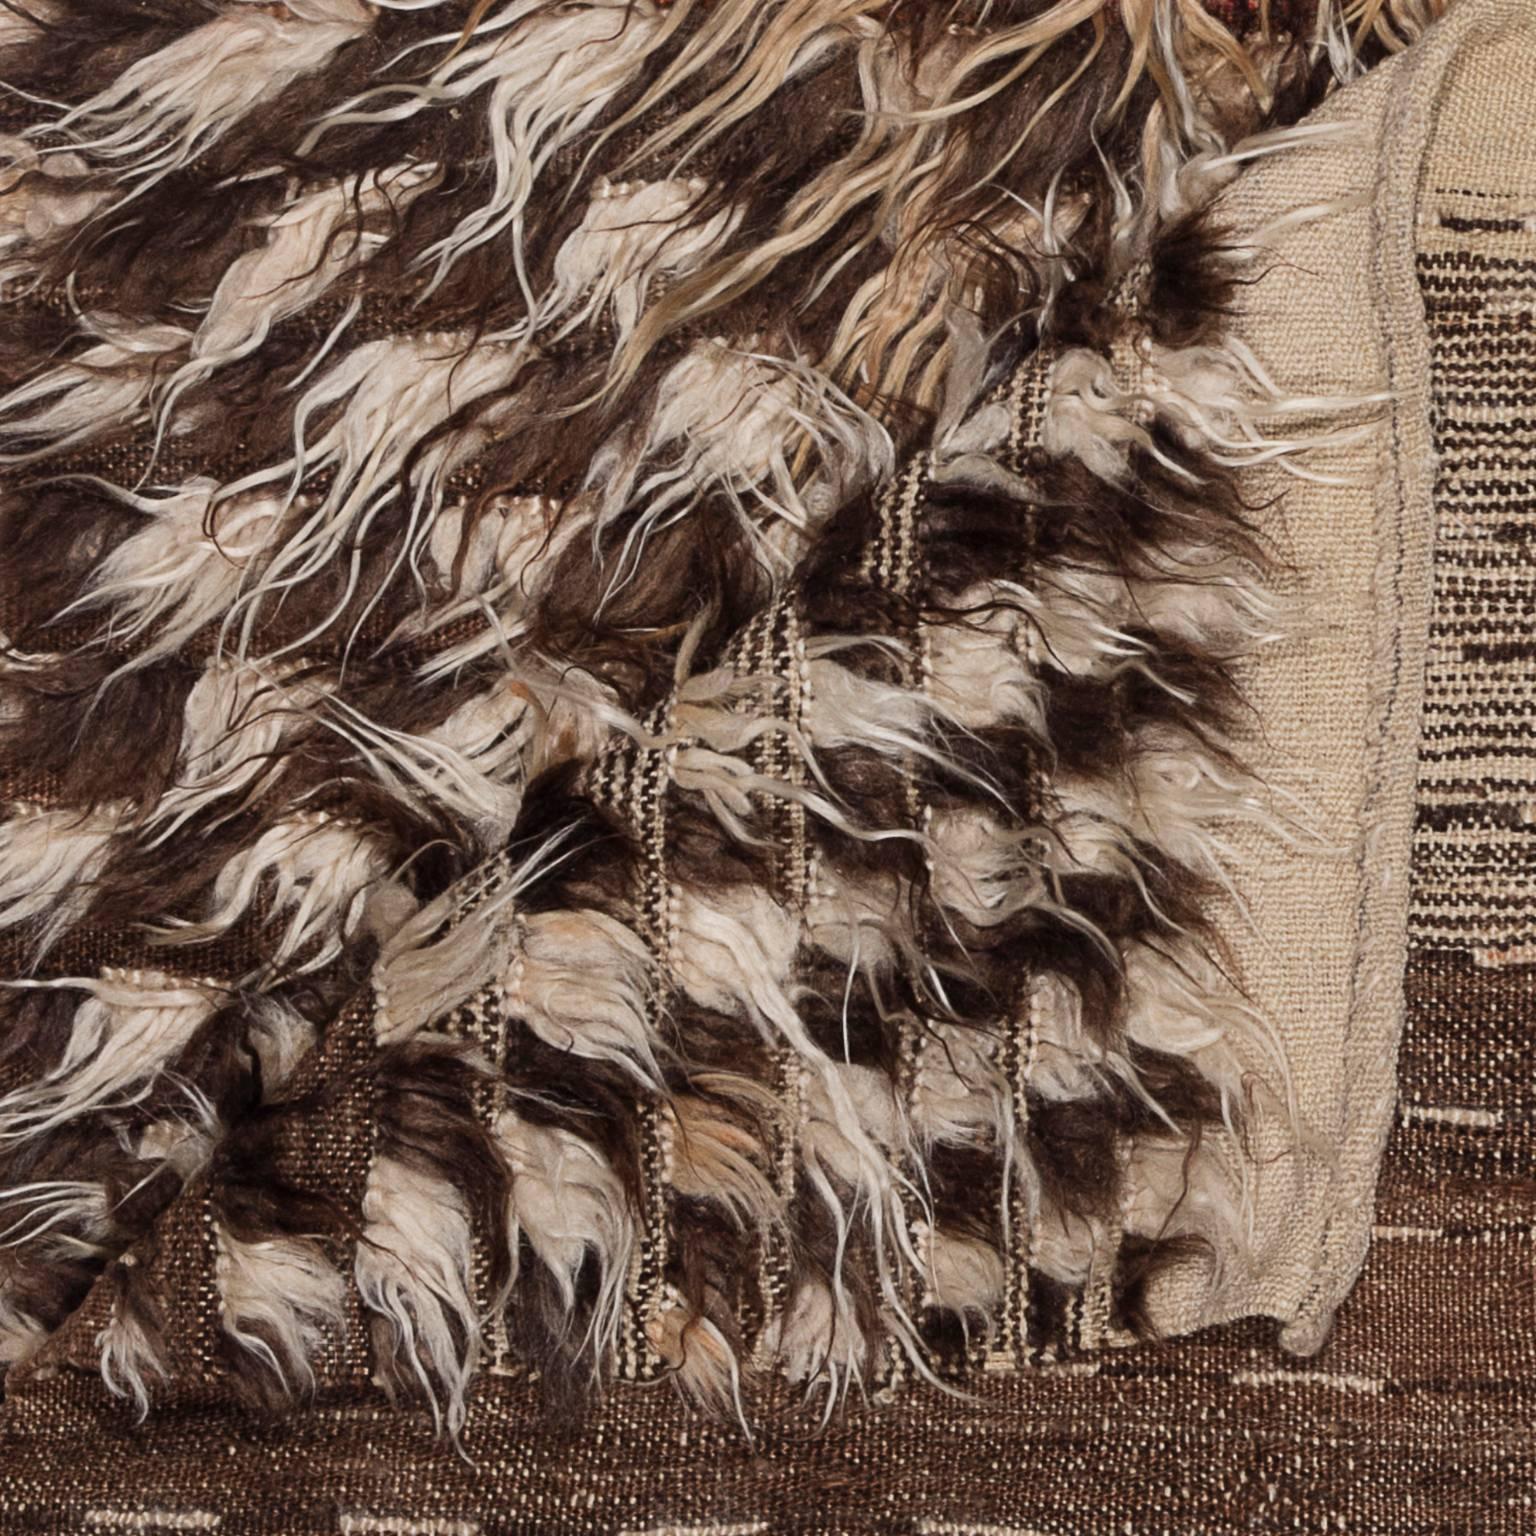 A Filikli's silky pile is handwoven from longhaired goat’s wool. This rug is one-of-a-kind with features that are unique to it alone.